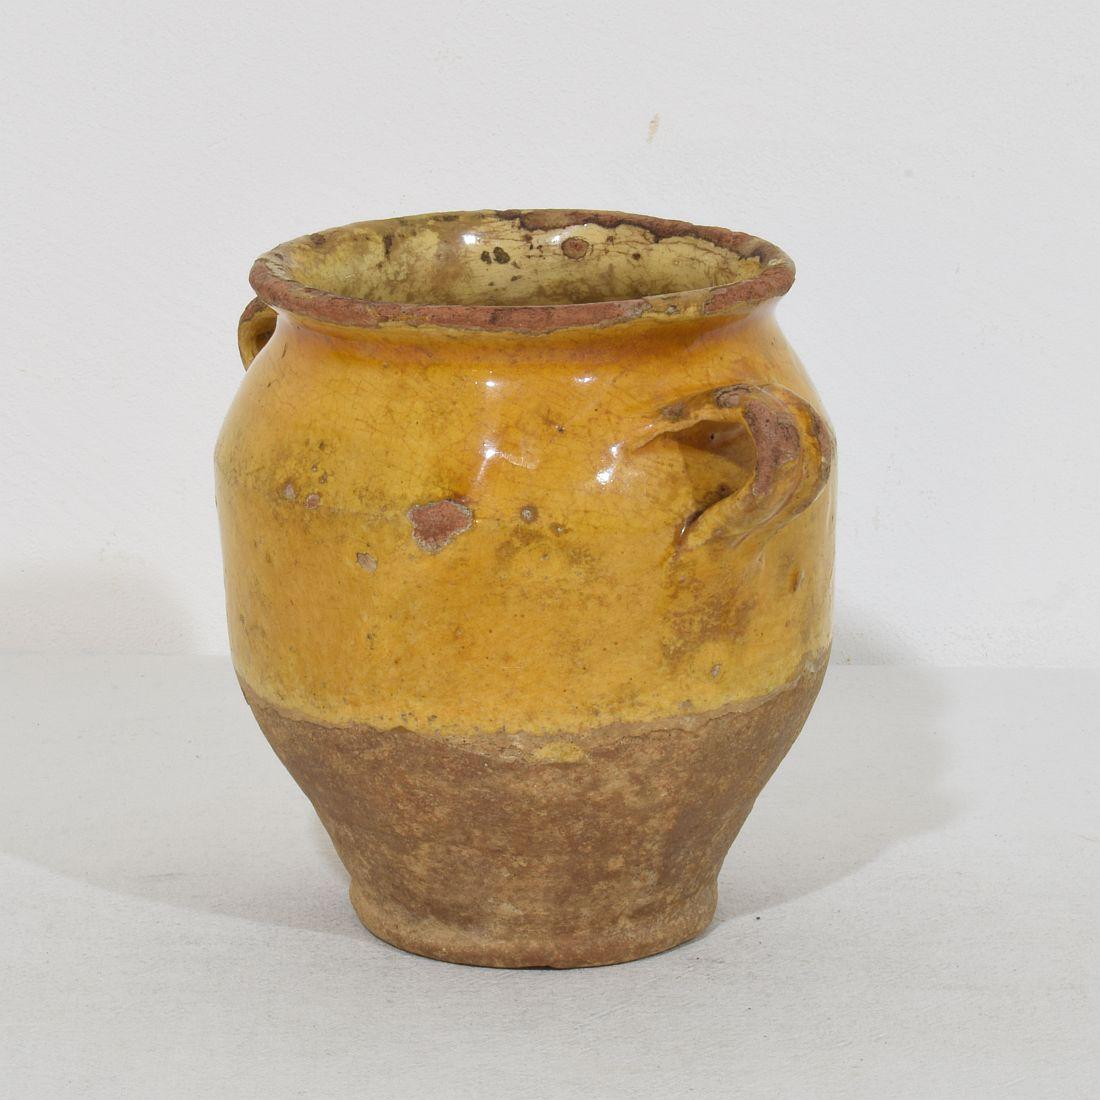 Beautiful small confit jar with its characteristic yellow glaze. 
Confit jars were used primarily in the South of France for the preservation of meats such as duck or goose for dishes such as cassoulet or foie gras. The bottom halves were left